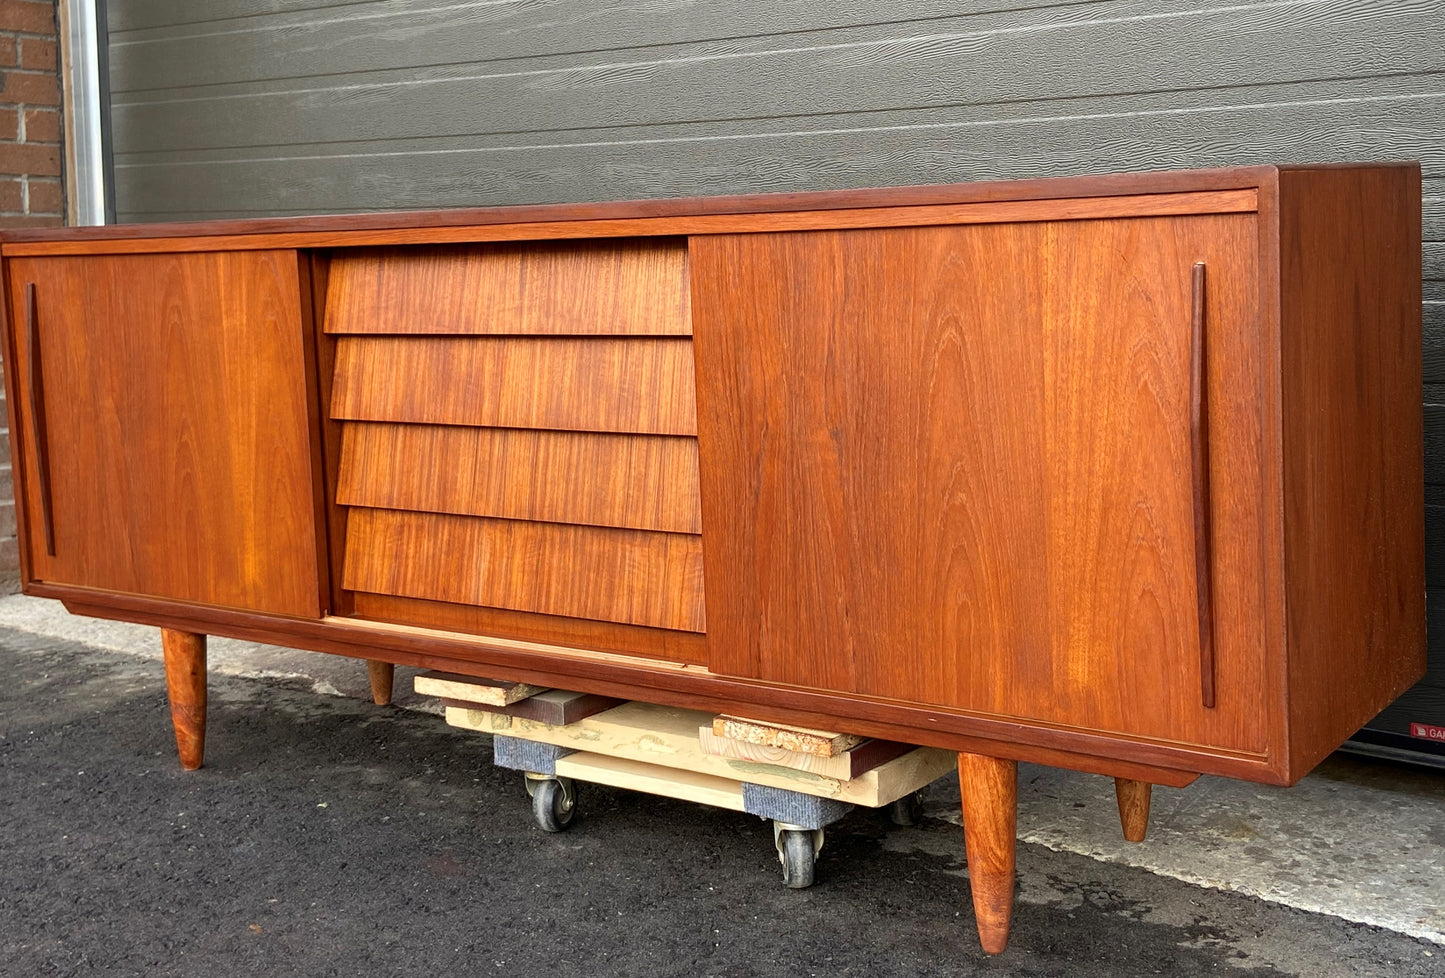 REFINISHED MCM Teak Sideboard Buffet 6 ft , PERFECT